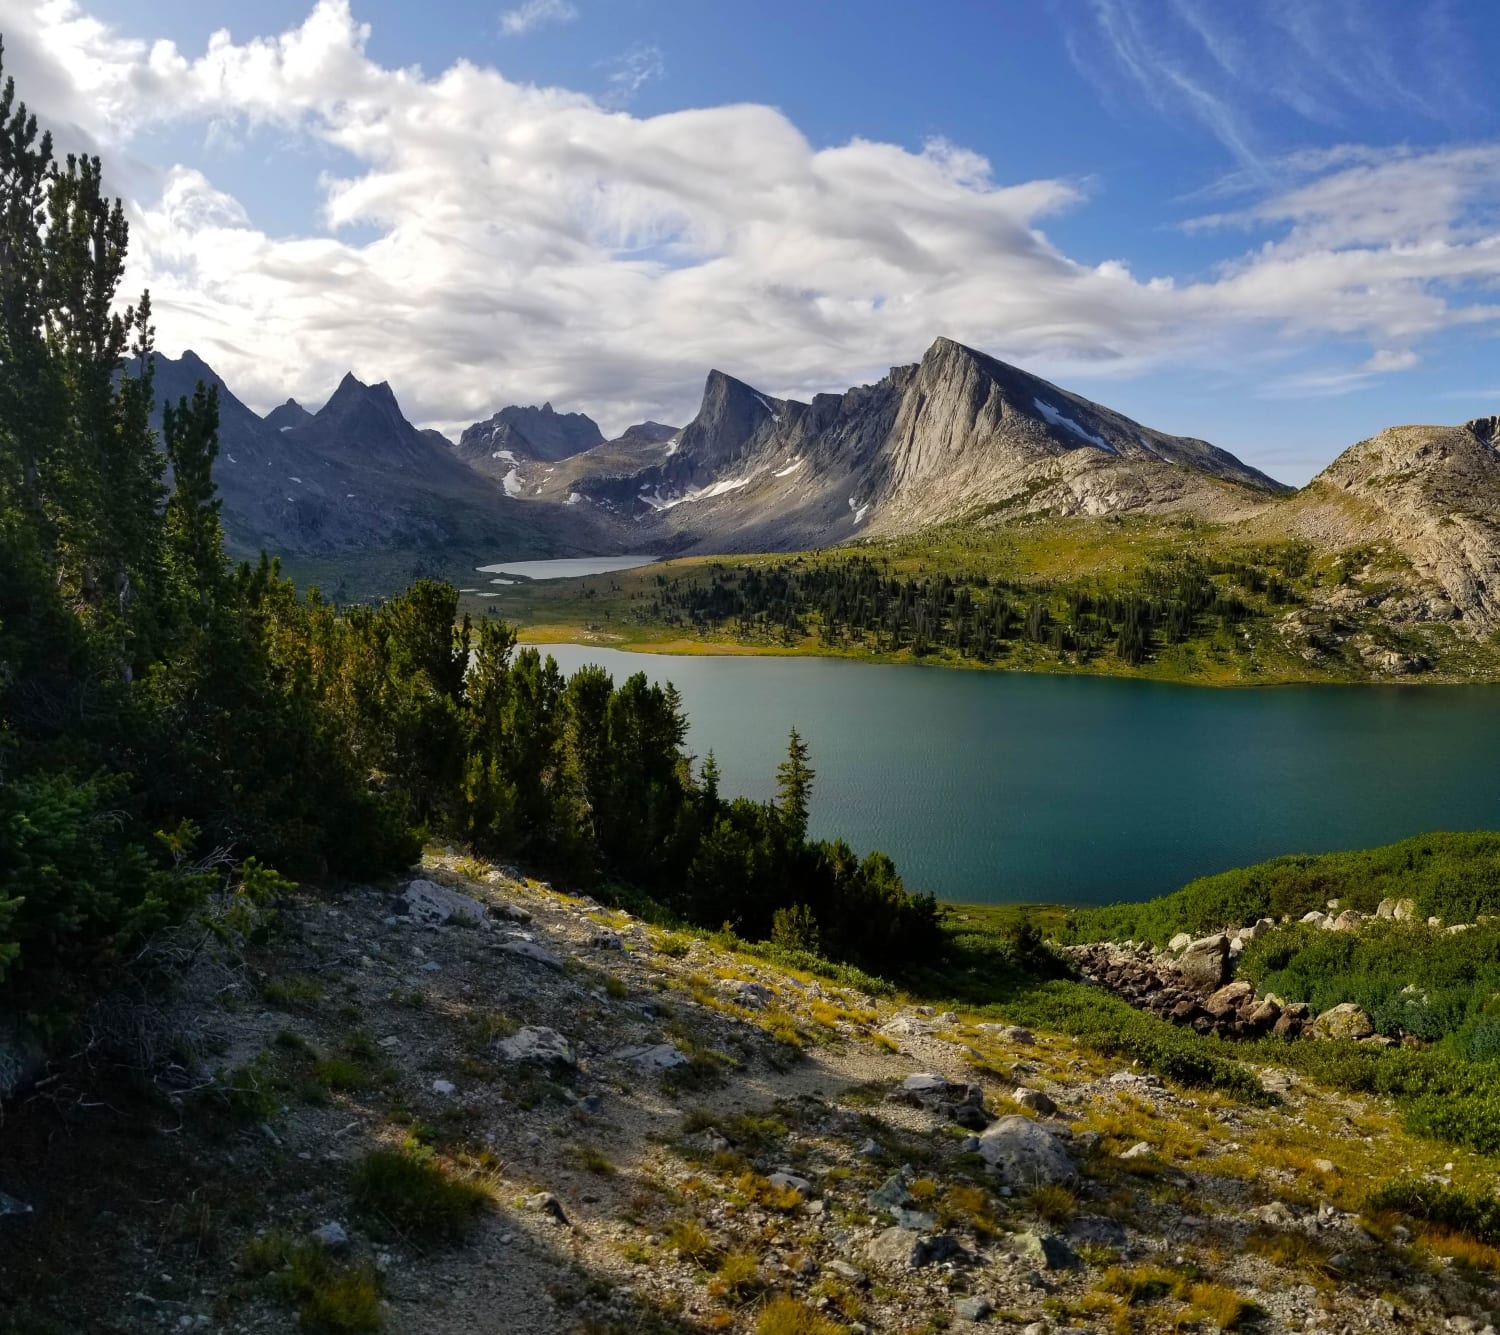 Morning on a use trail in the Wind River Range, Wyoming, USA.